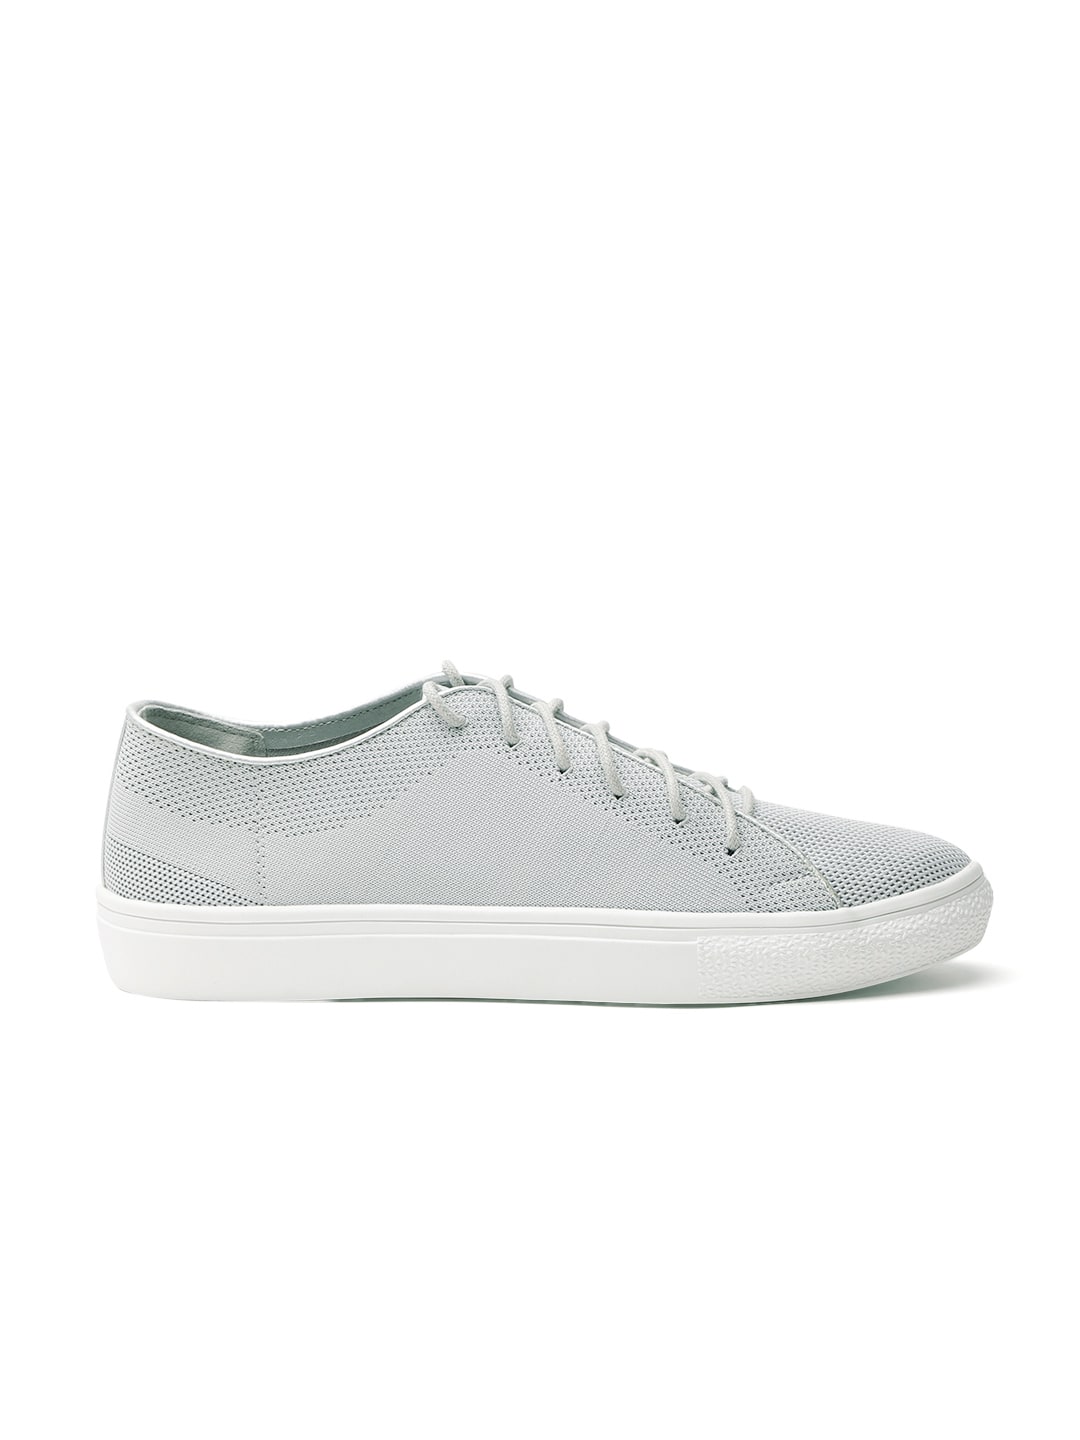 ether Women Grey Solid Sneakers Price in India